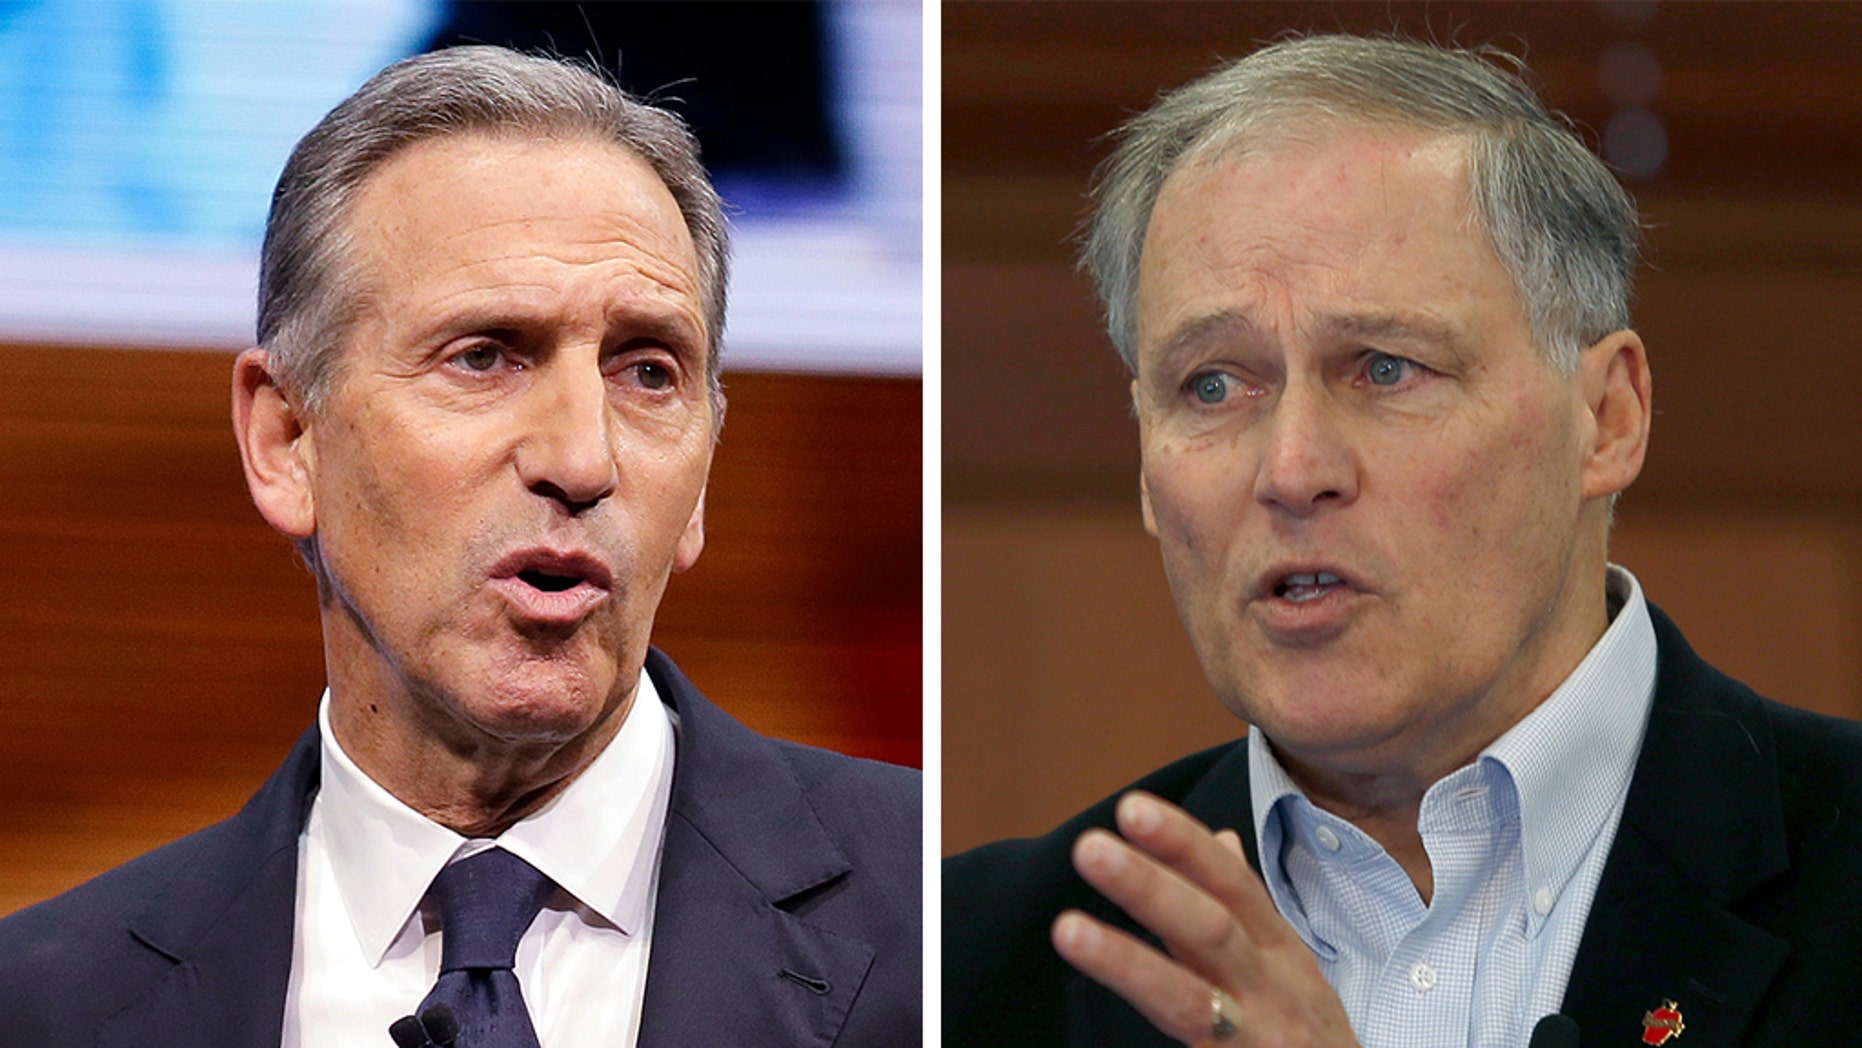 Inslee urges Schultz not to spoil 2020 race; says helping Trump win is ‘inexcusable’